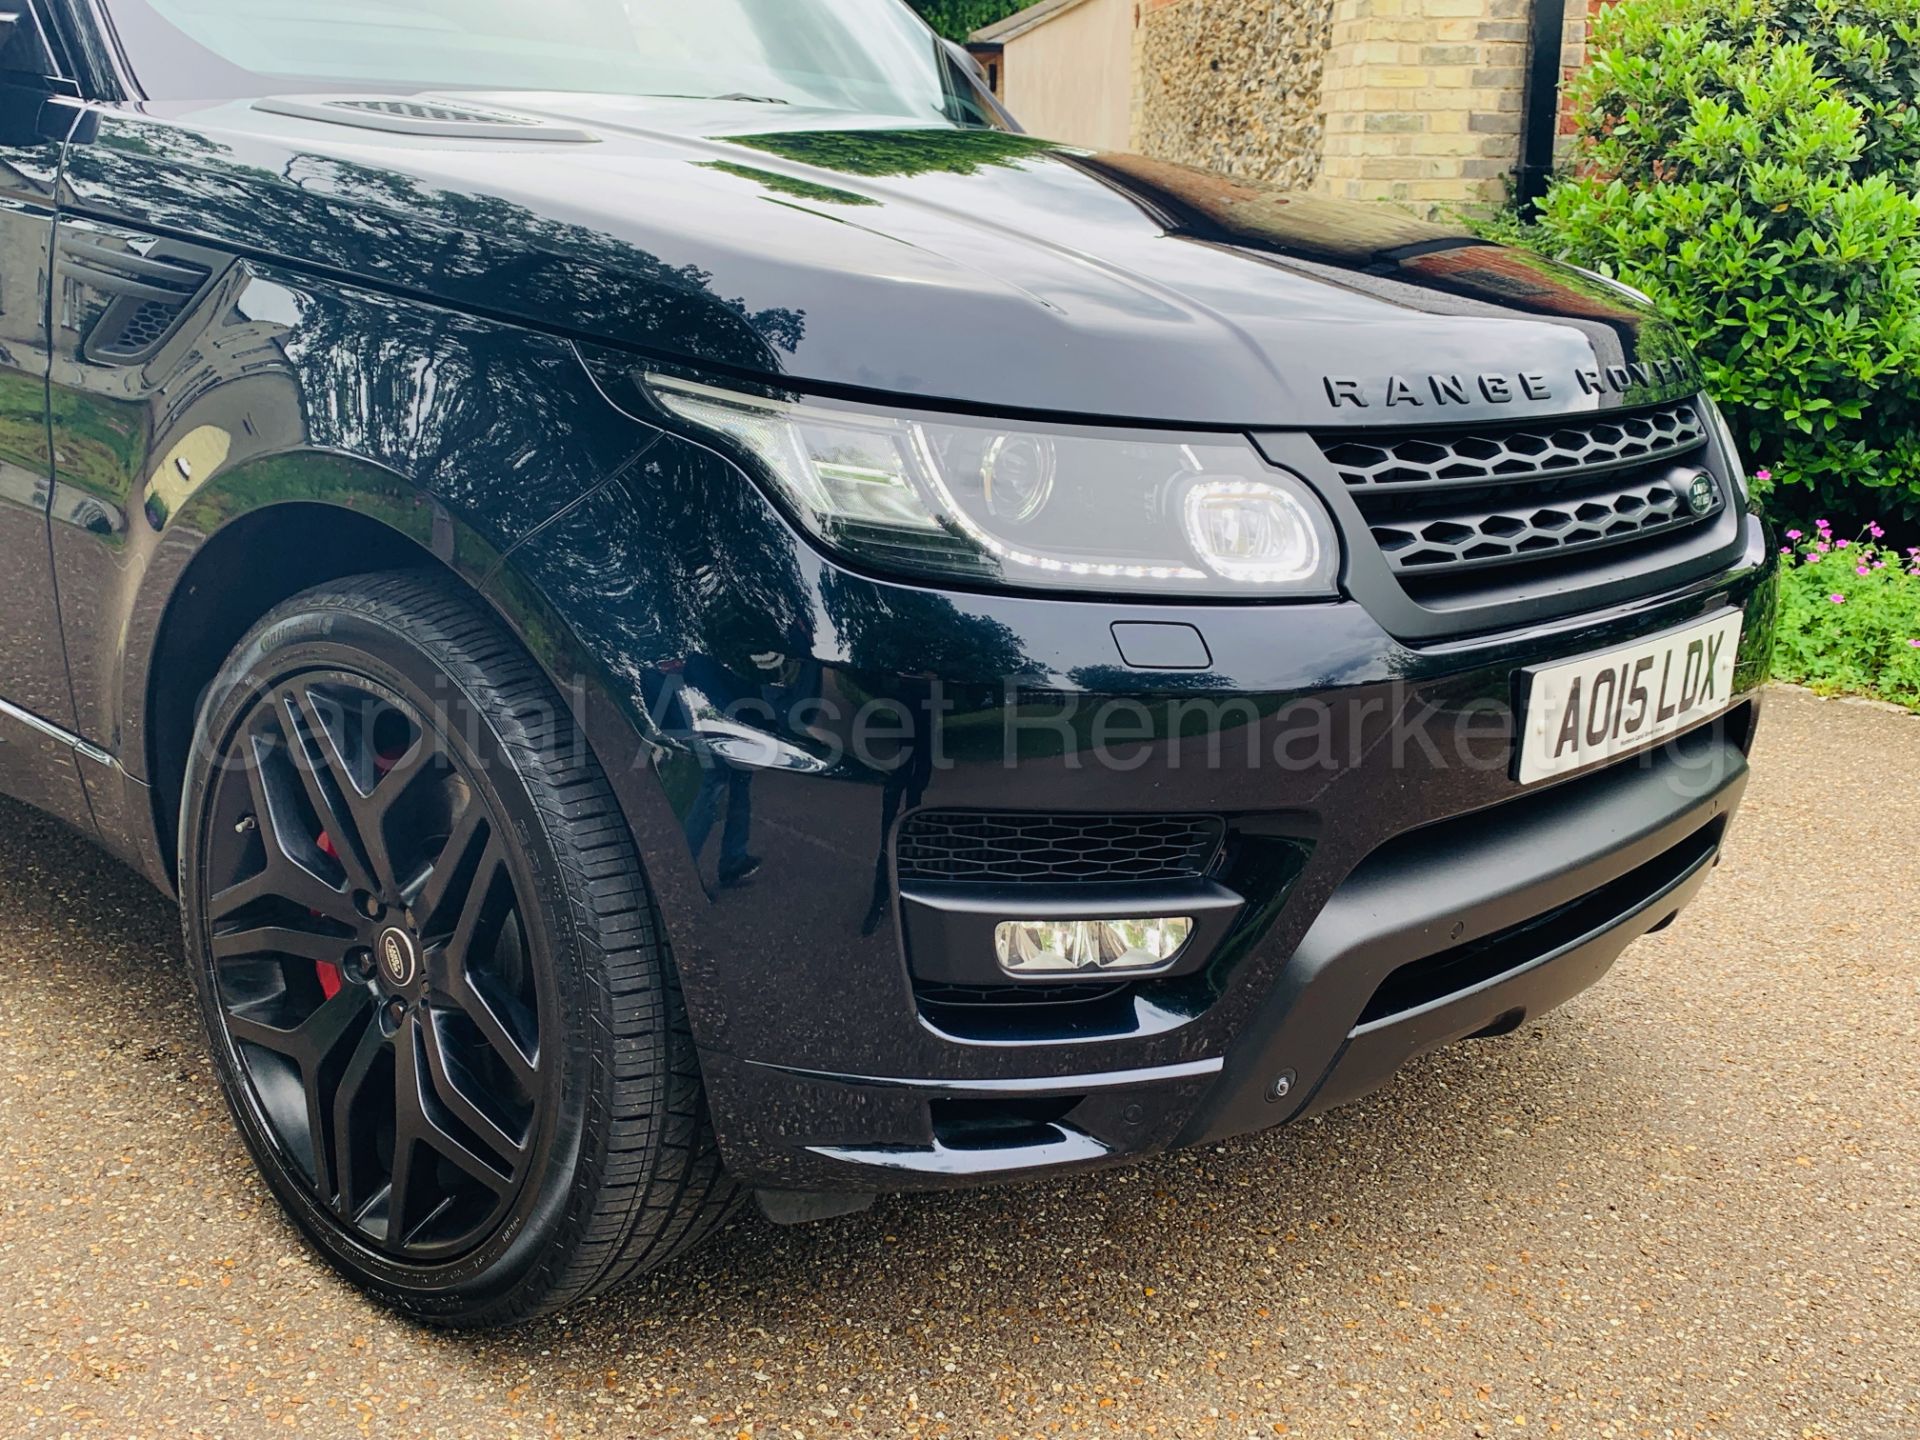 (On Sale) RANGE ROVER SPORT *AUTOBIOGRAPHY DYNAMIC* (2015) '4.4 SDV8 8 SPEED AUTO' **ULTIMATE SPEC** - Image 19 of 83